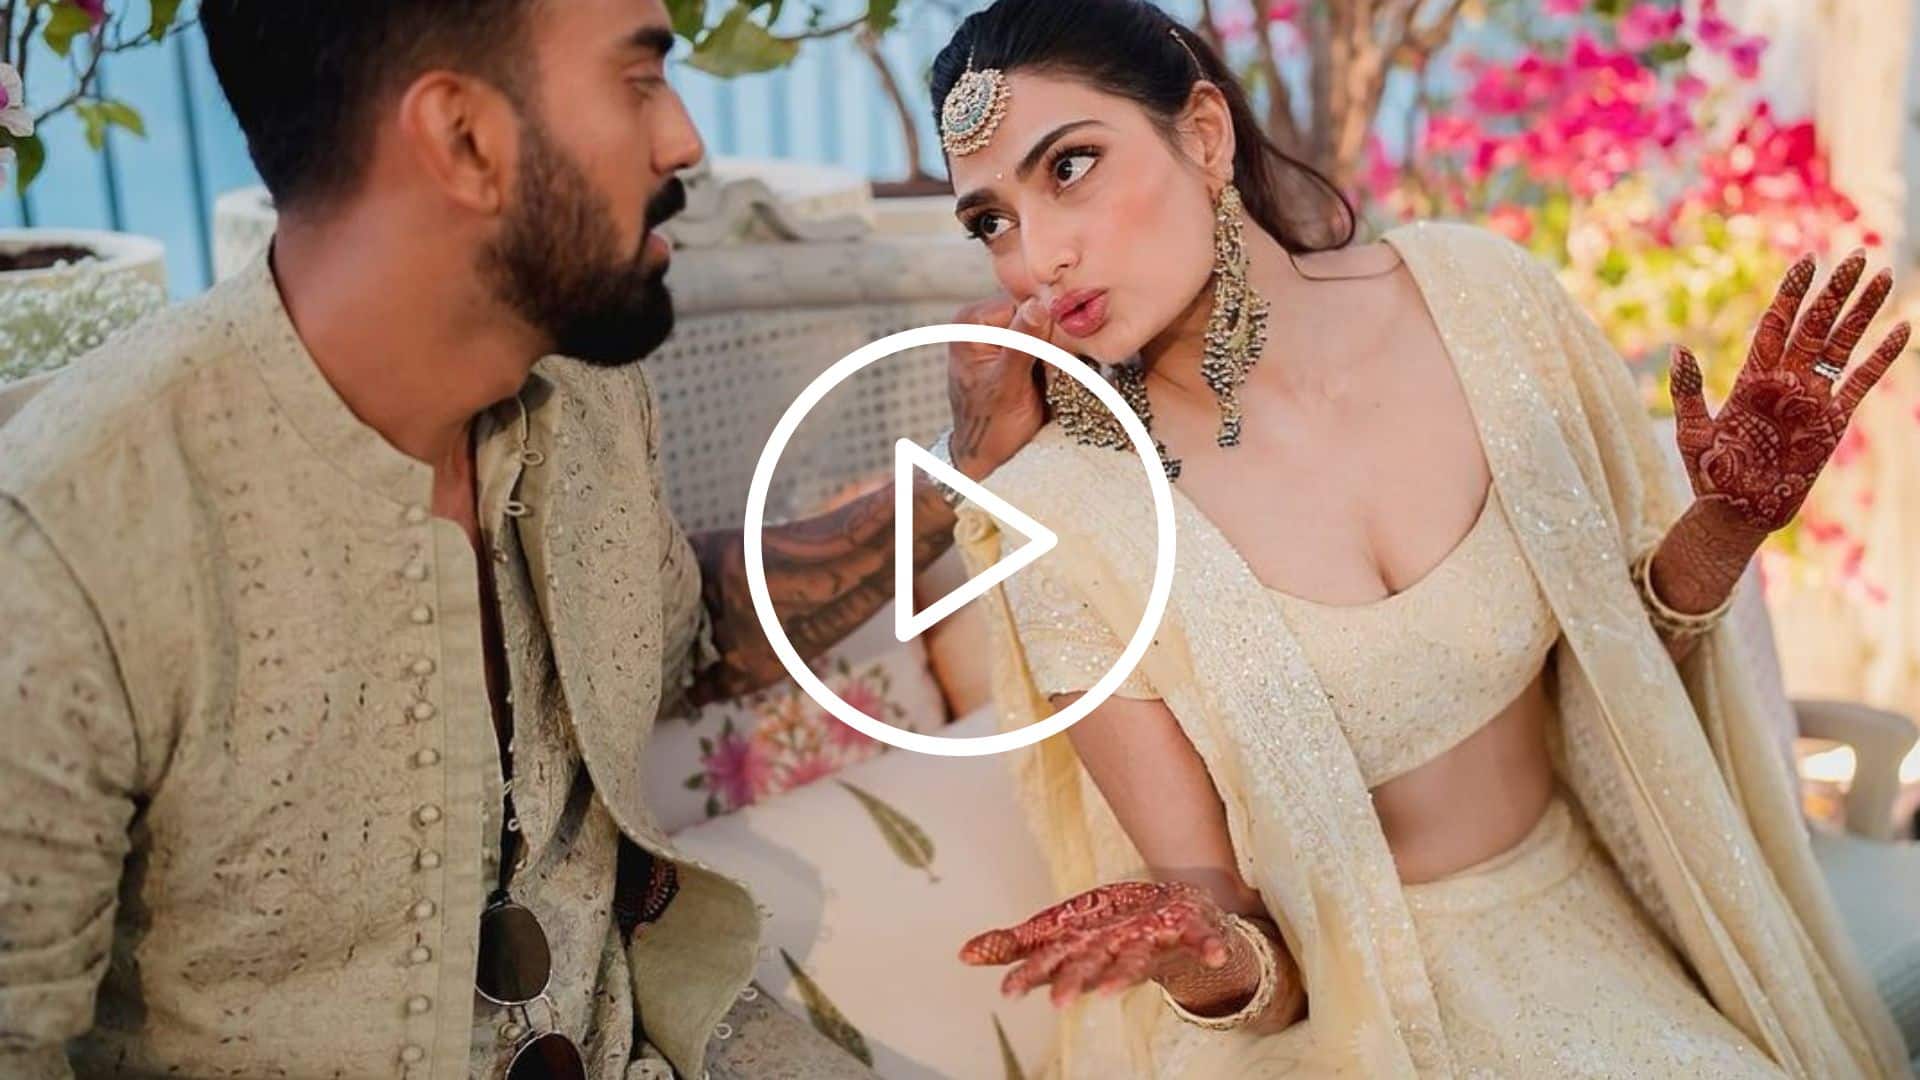 [Watch] KL Rahul Shares 'Sweet' Moments With Wife Athiya Shetty On Valentine's Day